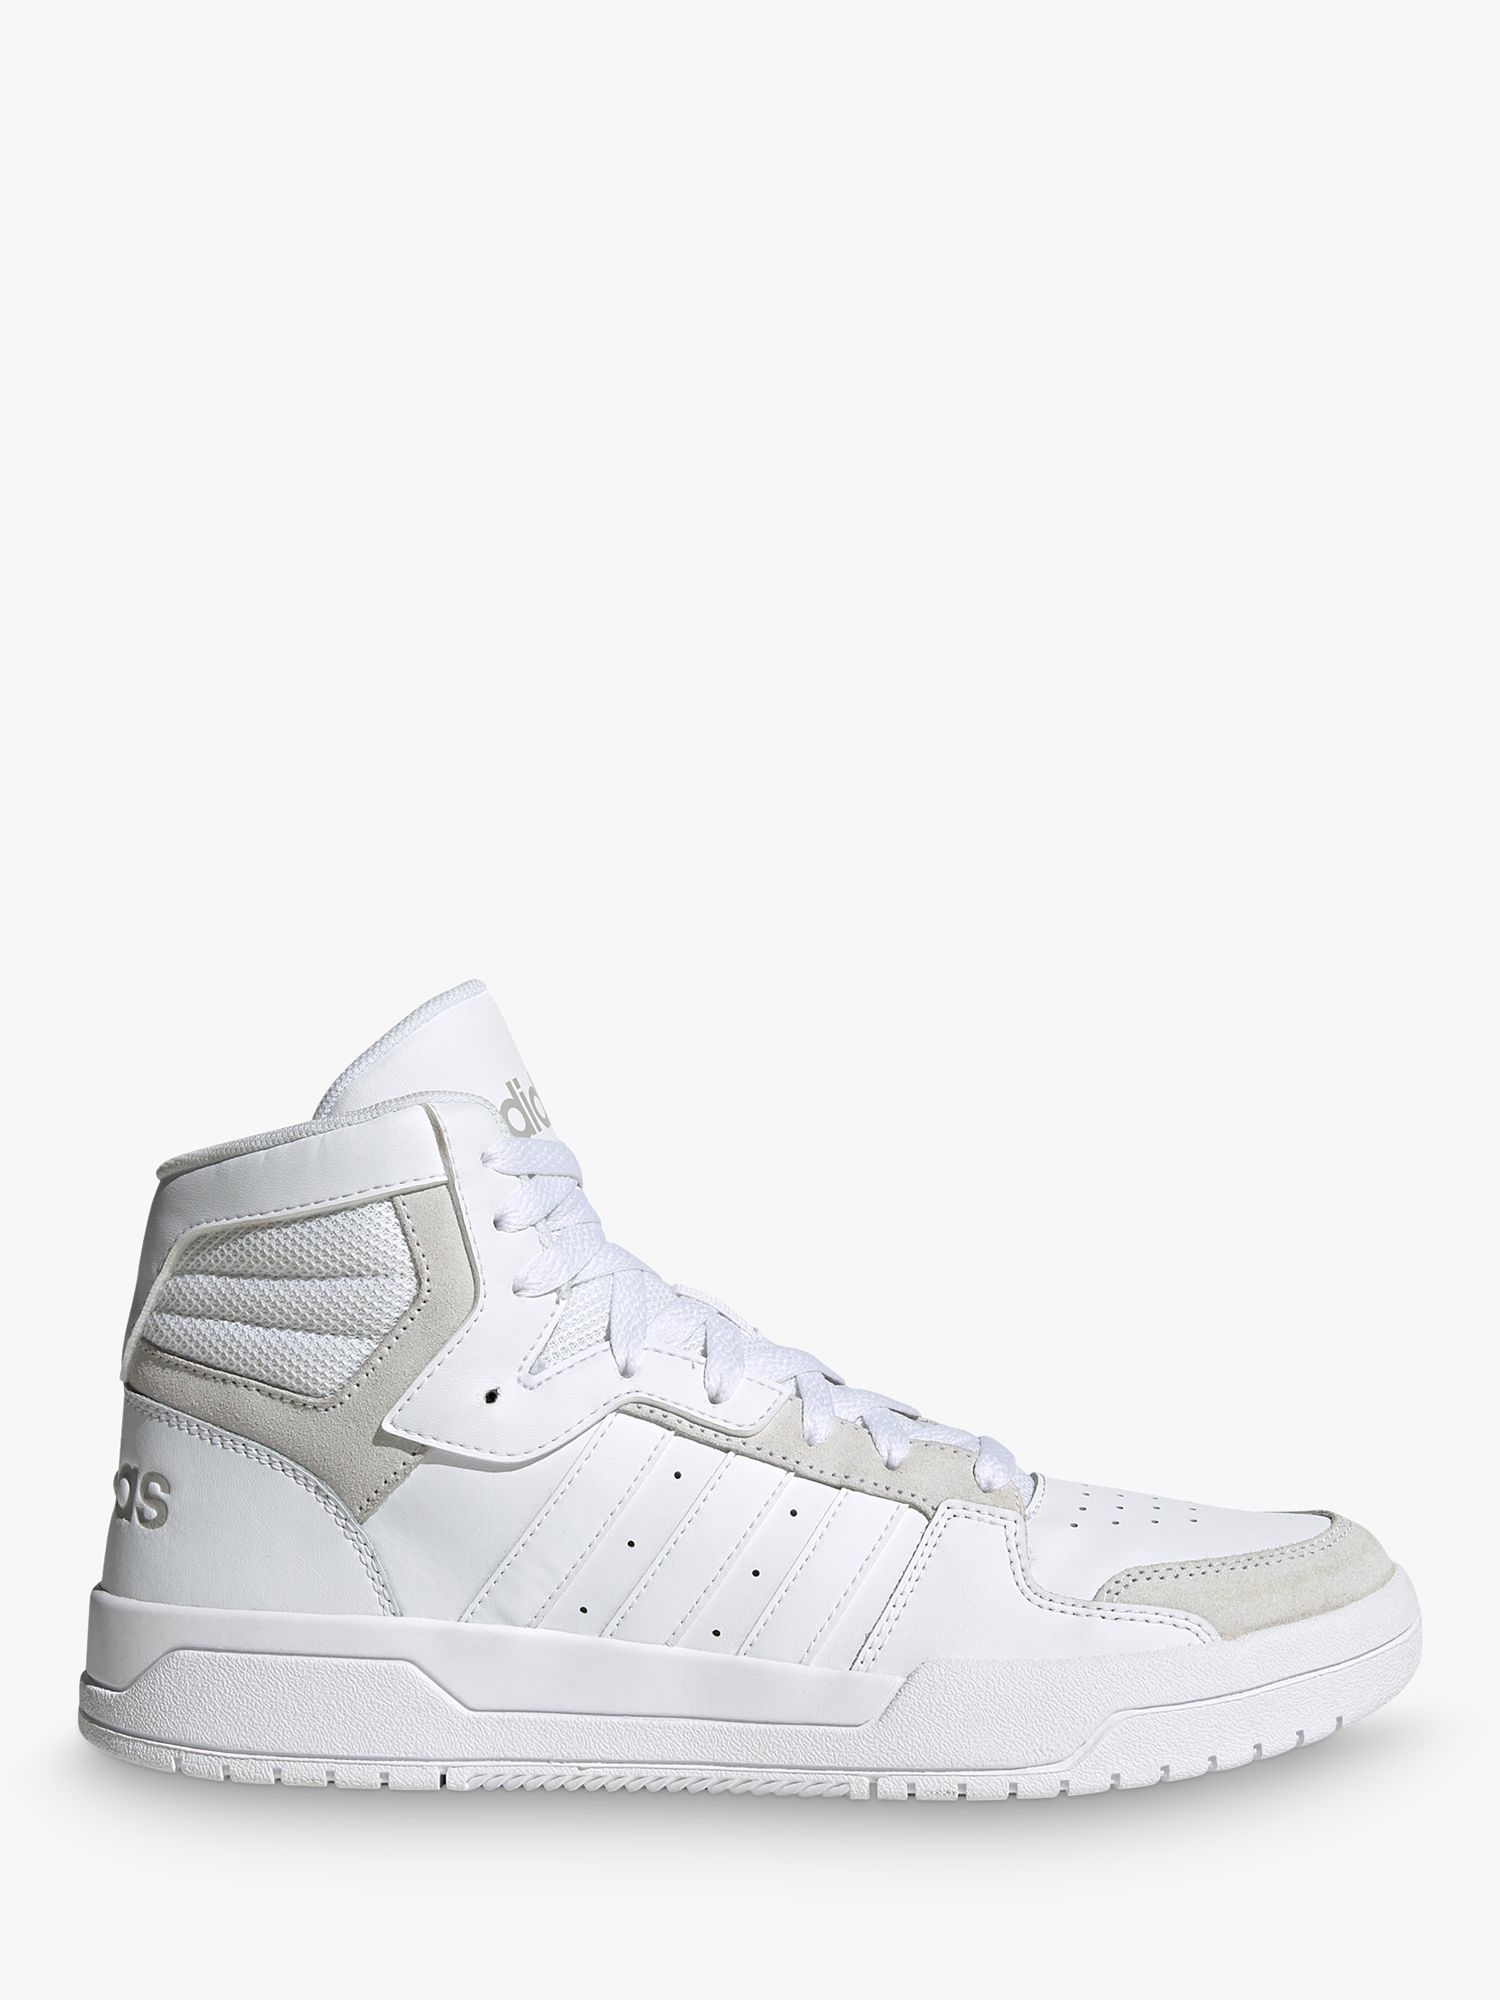 adidas Entrap Mid Leather Lace Up 